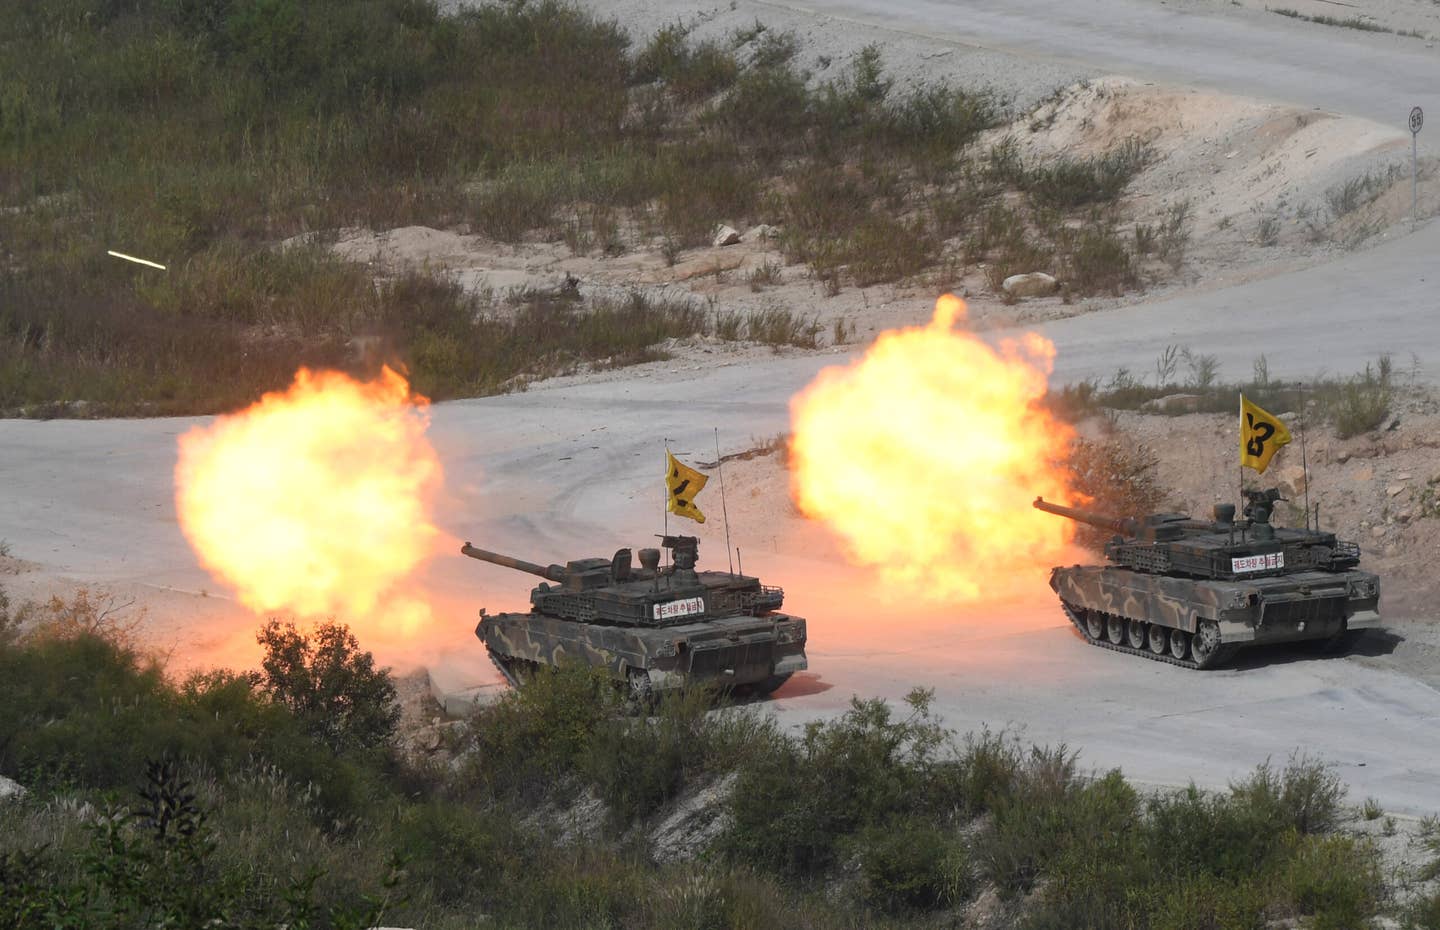 South Korean K2 tanks during a live fire demonstration for a media preview of the Defense Expo Korea 2018 at Seungjin Fire Training Field in Pocheon, 65 km northeast of Seoul, Sept. 11, 2018. (JUNG YEON-JE/AFP via Getty Images)